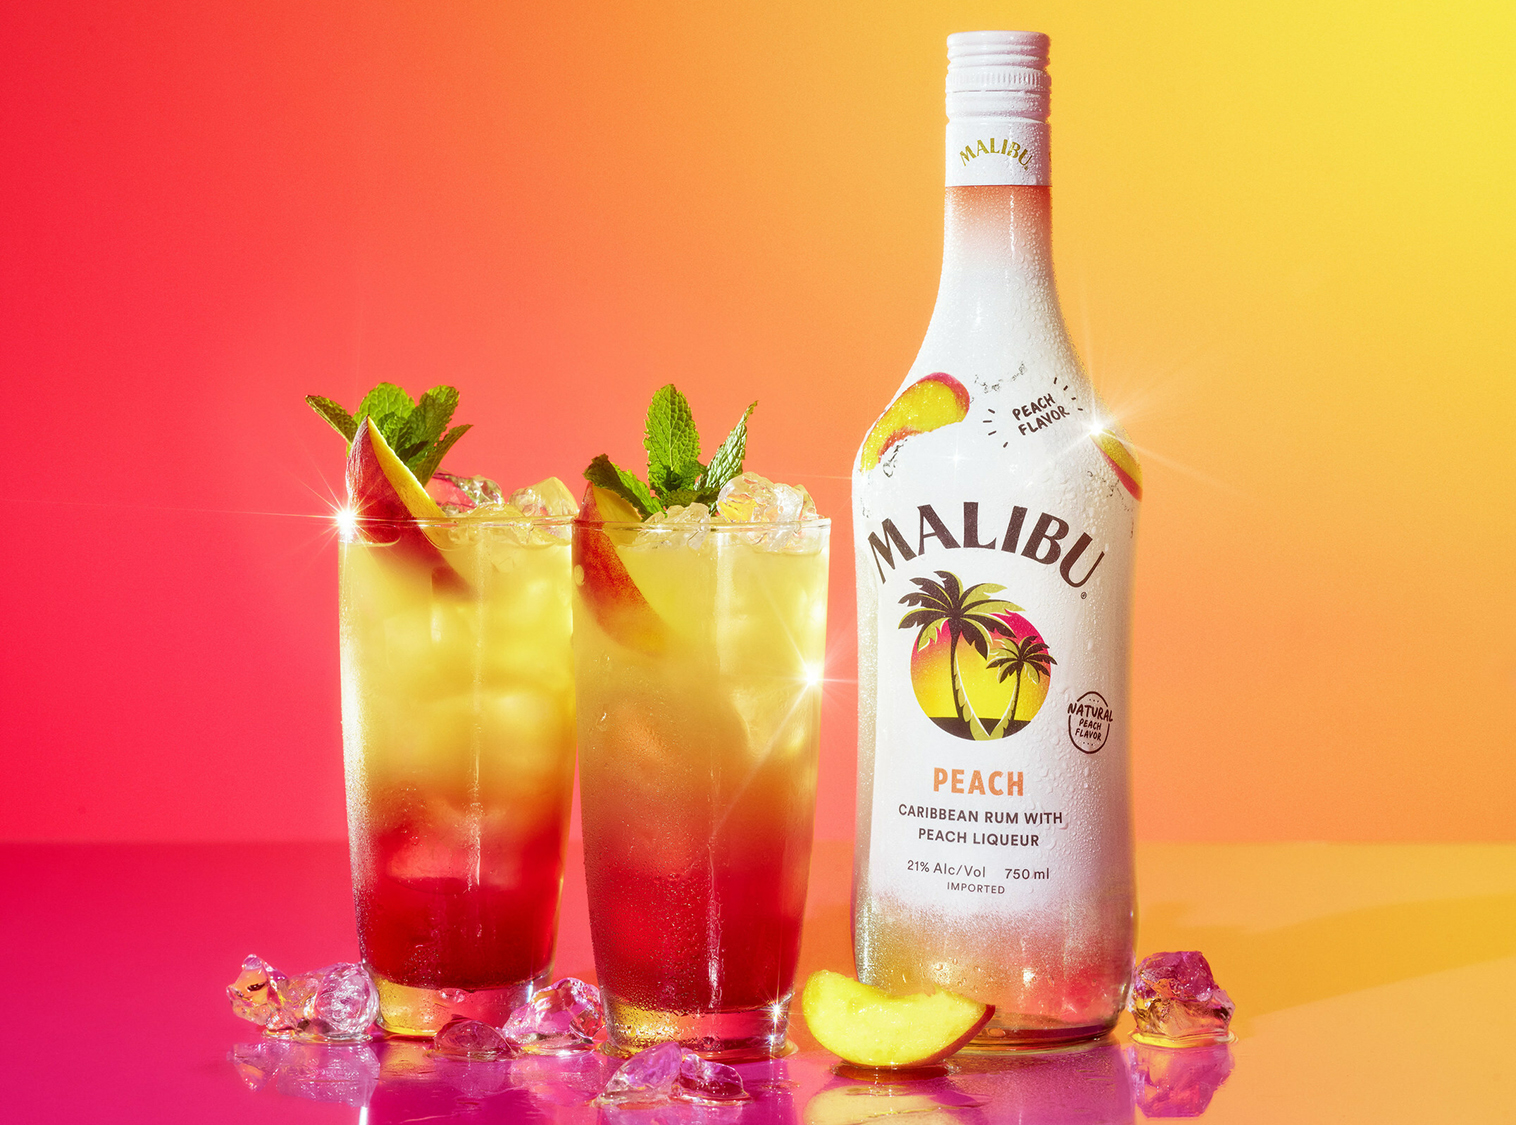 Malibu Peach Rum Delivers The Free-Spirited Feeling Of Summer